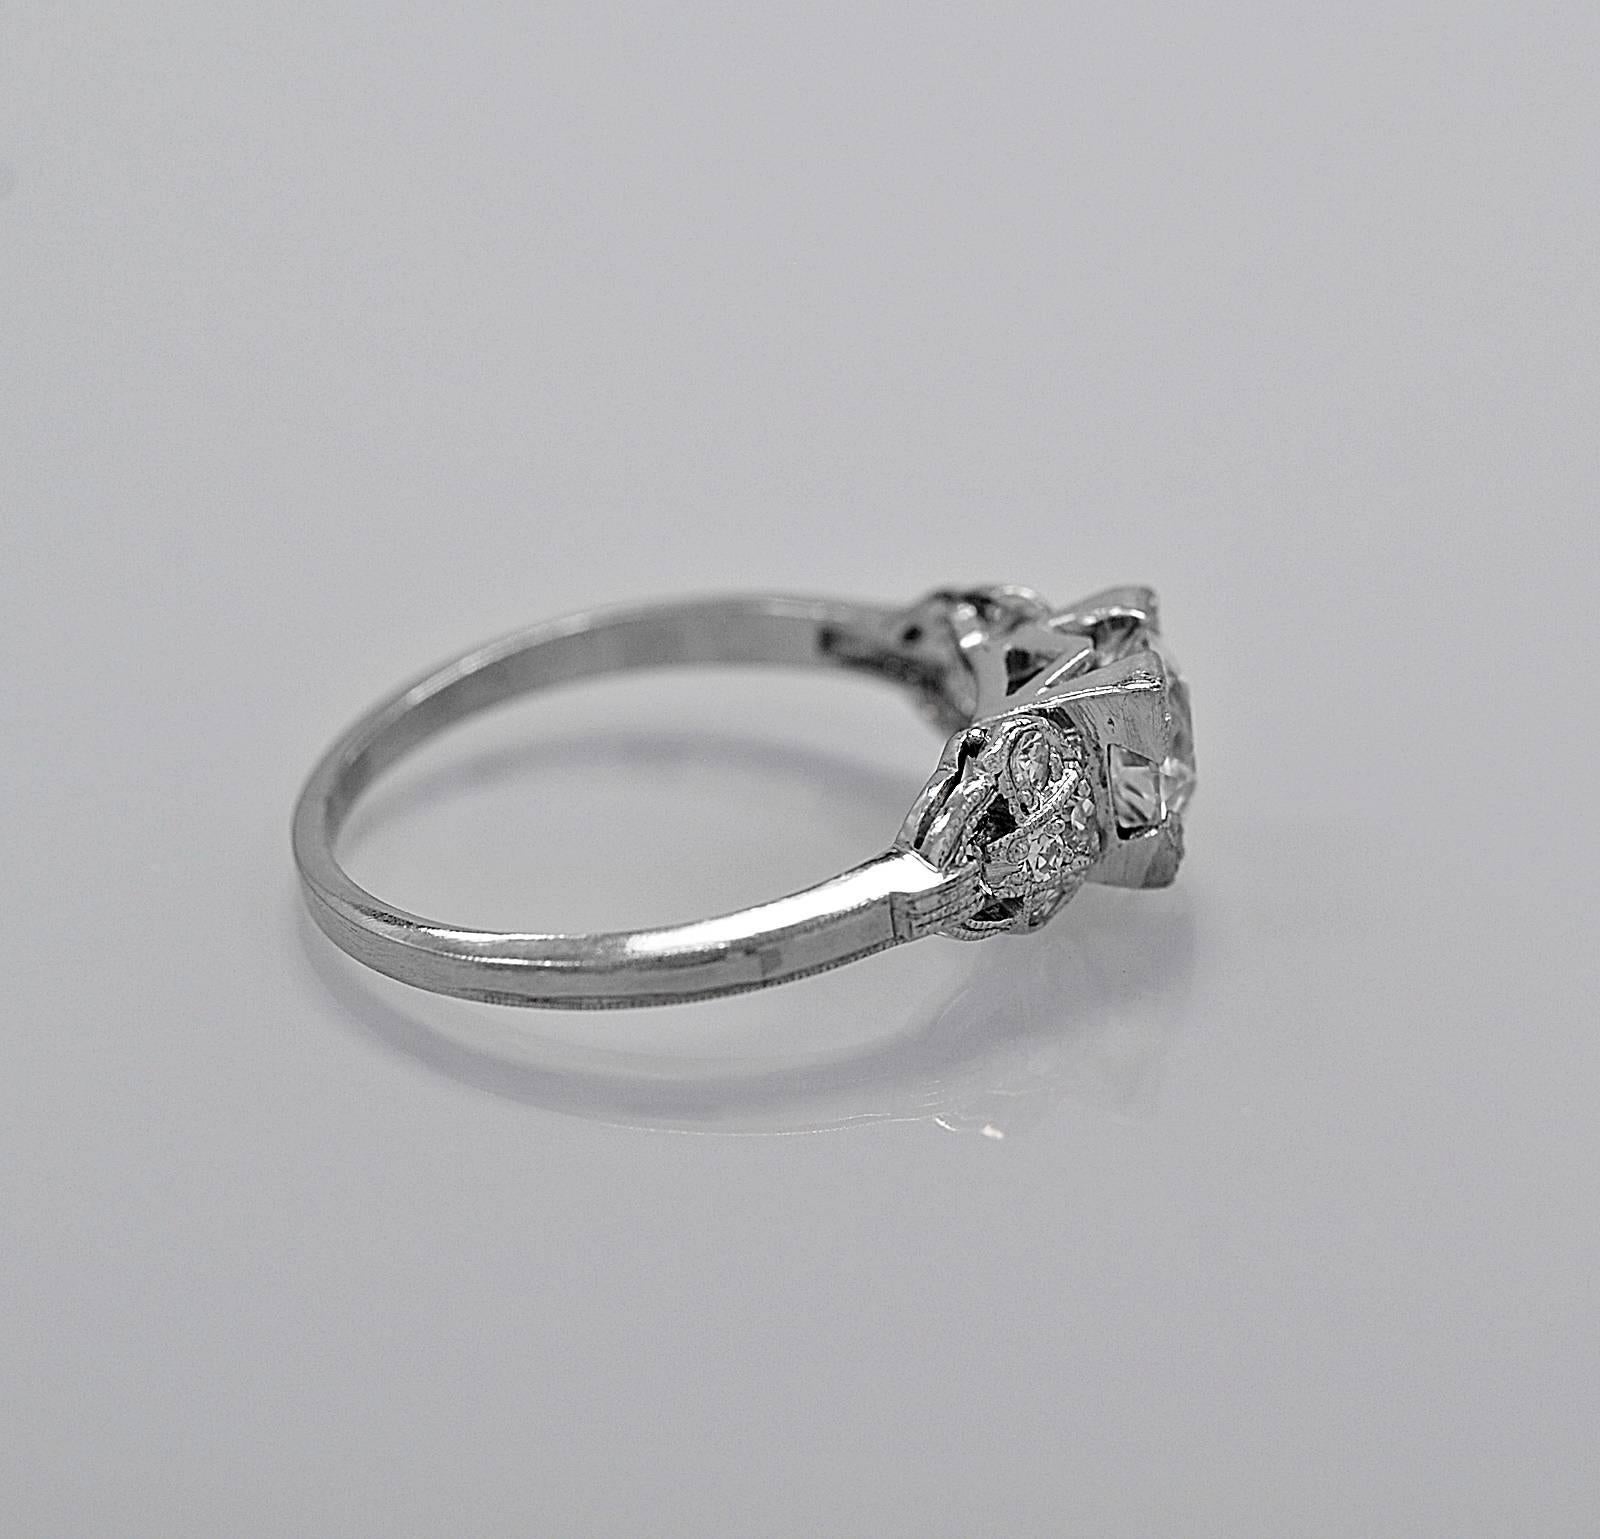 This antique engagement ring is crafted in platinum and features a .70ct. European cut diamond with VS2 clarity and I color. The center diamond has trefoil prongs giving it a squared off look. The accompanying diamond melee decorate the sides of